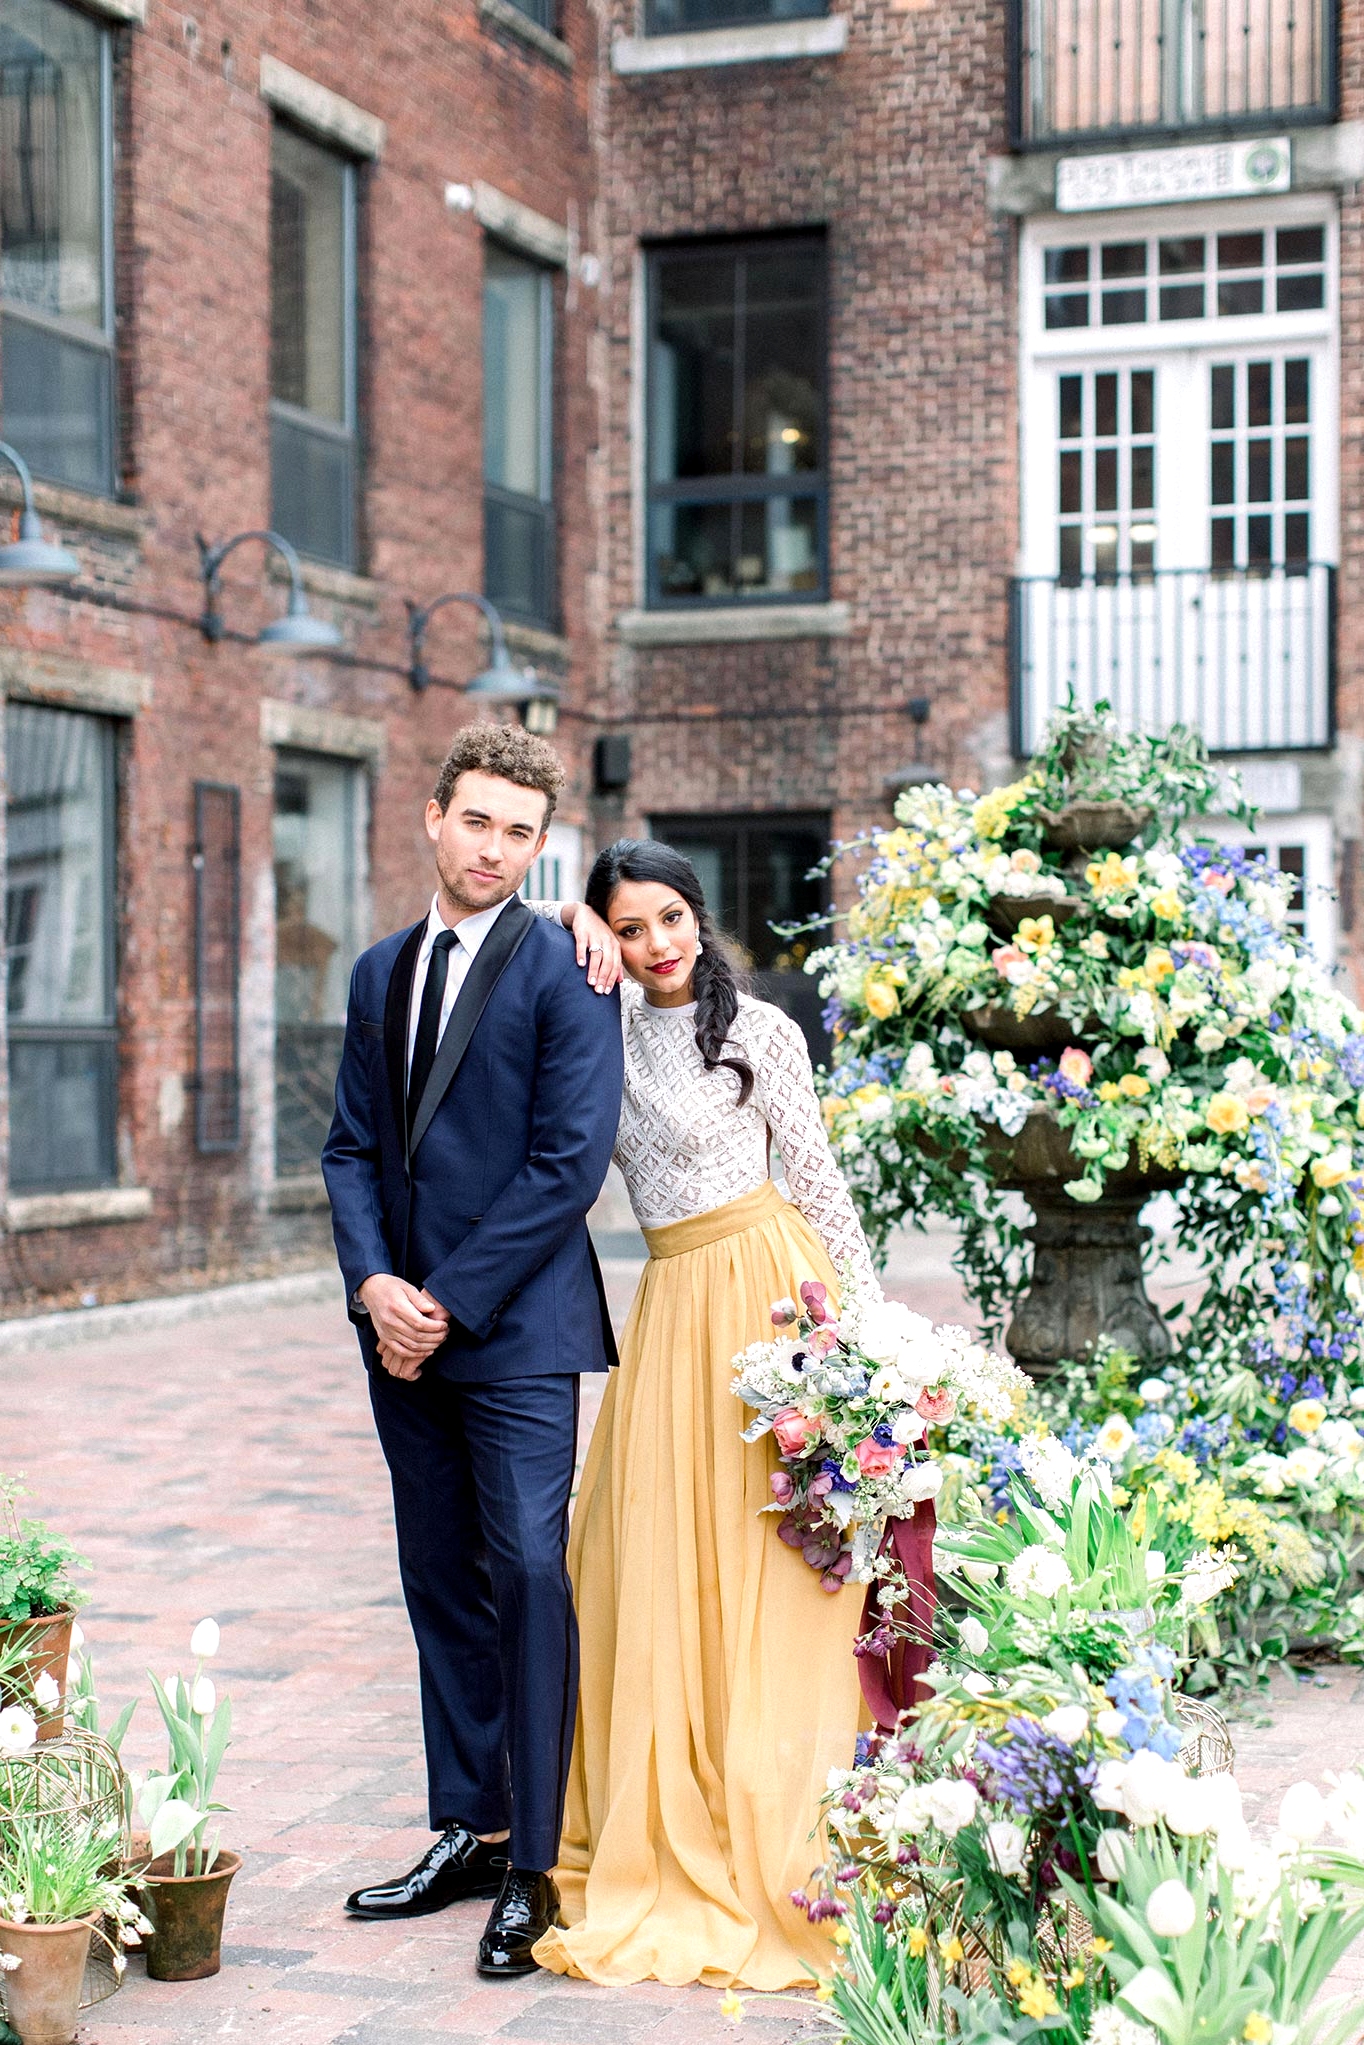 courtyard wedding ceremony with potted plant aisle markers, a floral fountain backdrop, a groom in a navy suit and bride in a two piece wedding dress with a mustard skirt and lace top